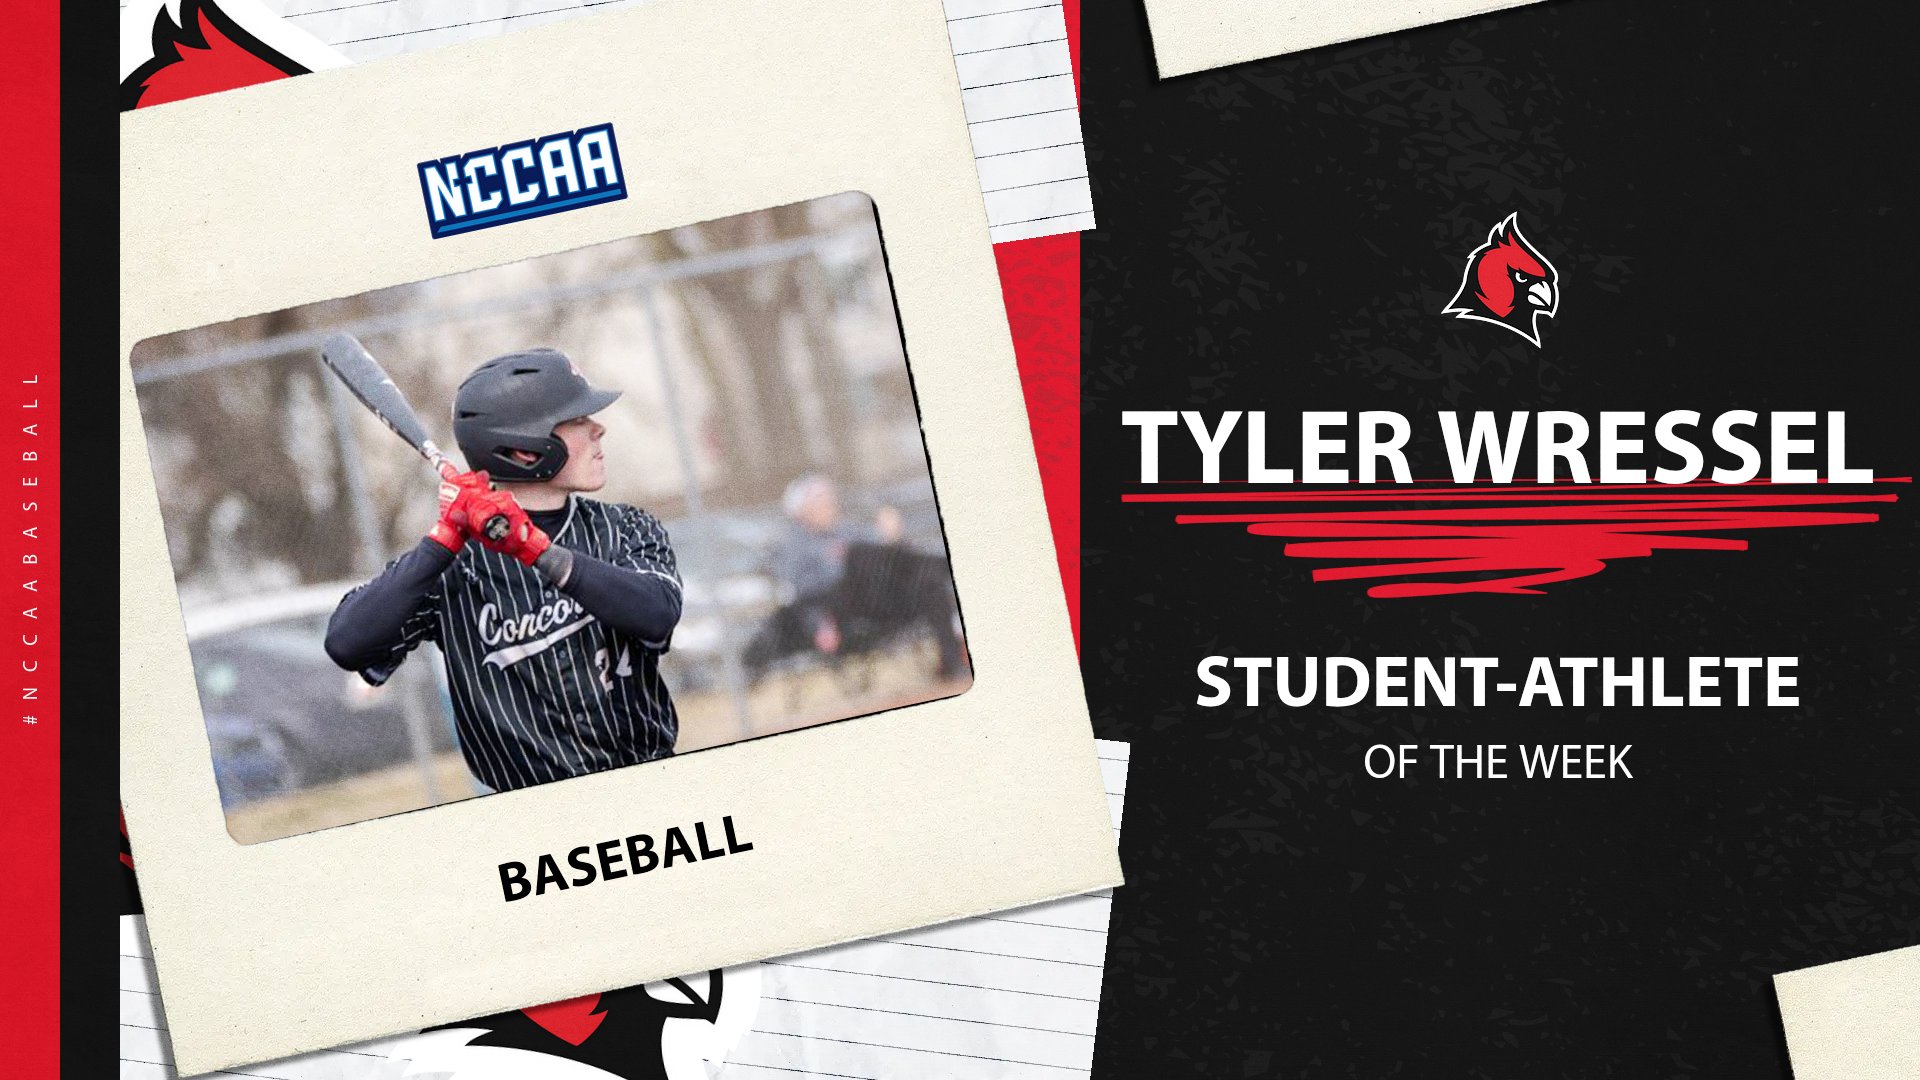 Tyler Wressel earns NCCAA Offensive Player of the Week